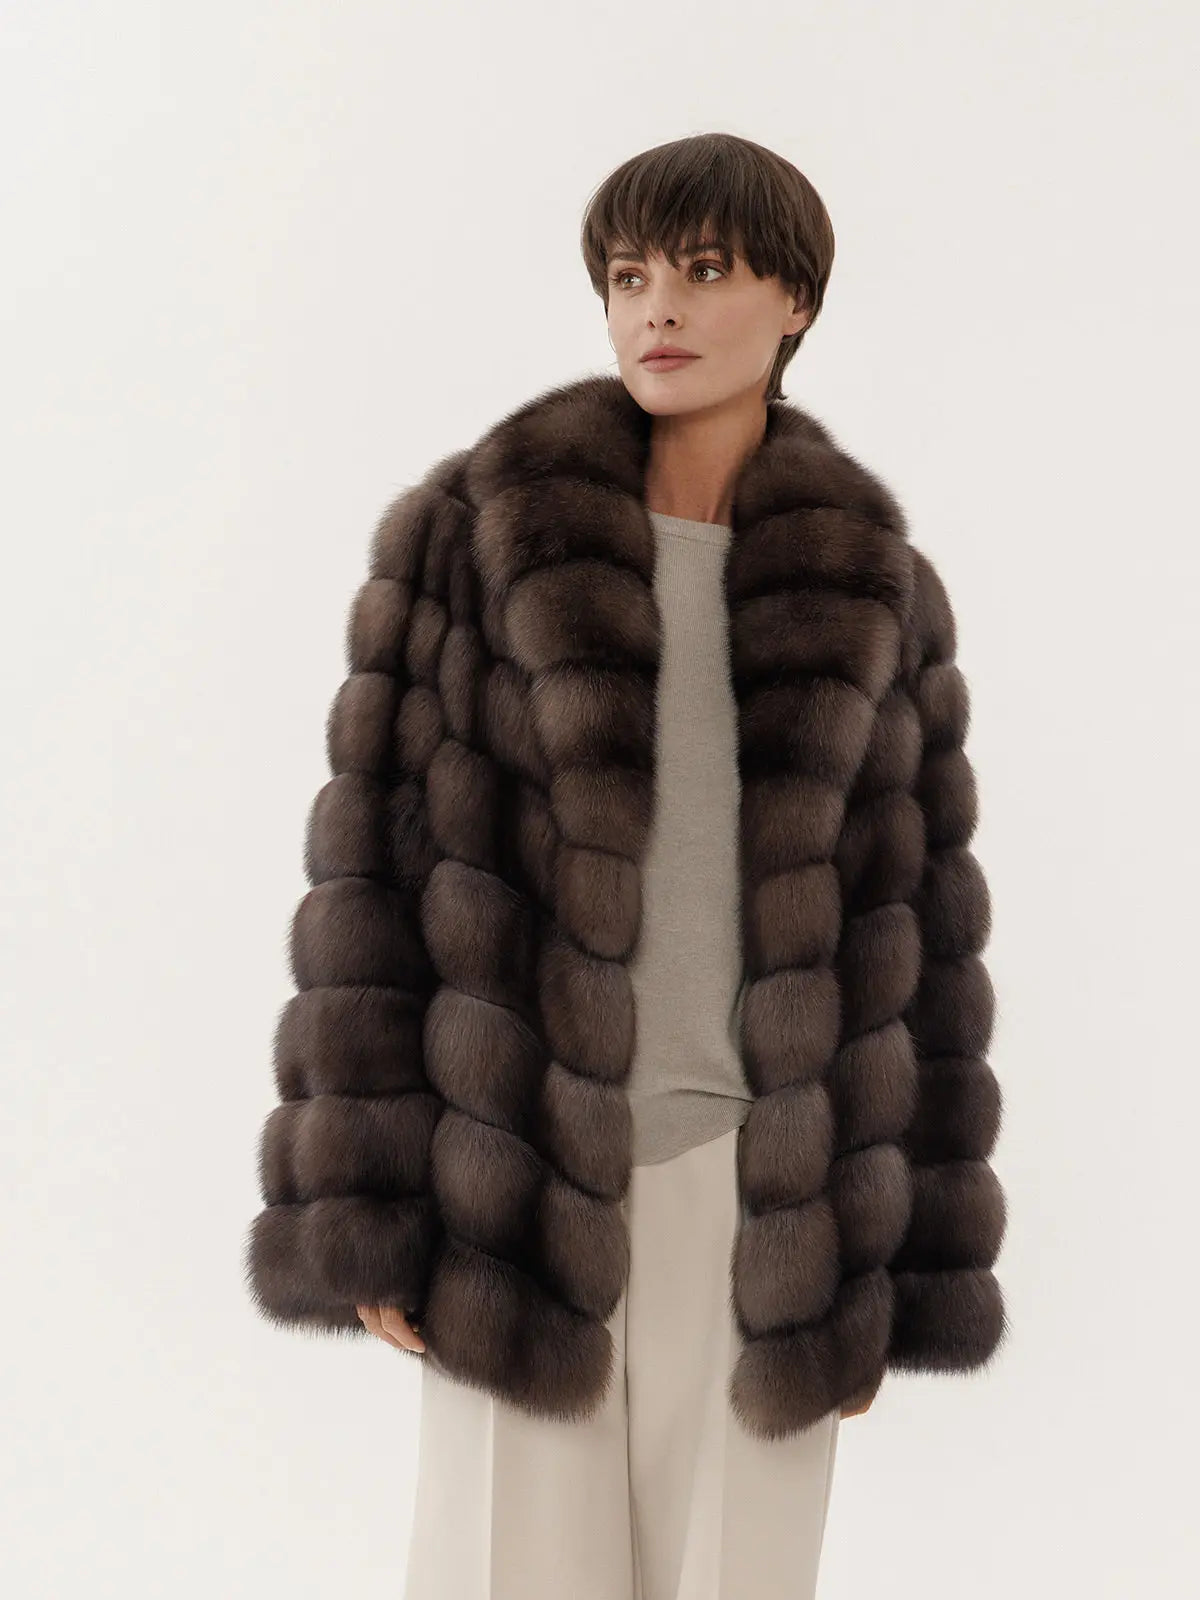 Sable coat with shawl collar